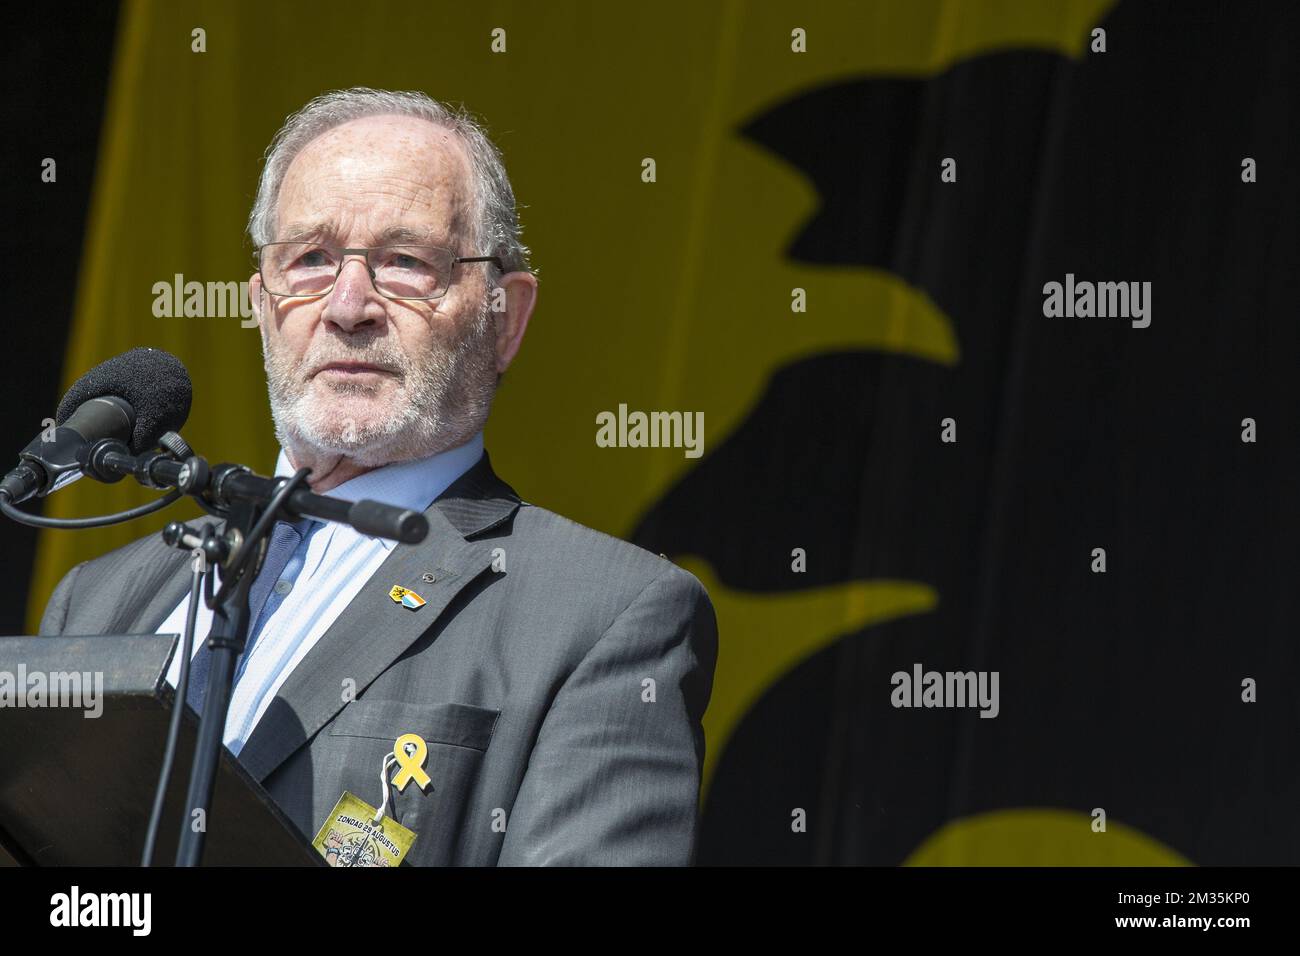 Wim De Wit delivers a speech at the 20th edition of the 'IJzerwake' ceremony at the 'Gebroeders Van Raemdonck Monument' in Ieper (Ypres), Sunday 29 August 2021. The Ijzerwake commemorates the victims of the two World Wars combined with a rally for Flemish independence. The event derives its name from the Ijzer (Yser) river where the most deadly battles of WWI were fought. BELGA PHOTO NICOLAS MAETERLINCK Stock Photo